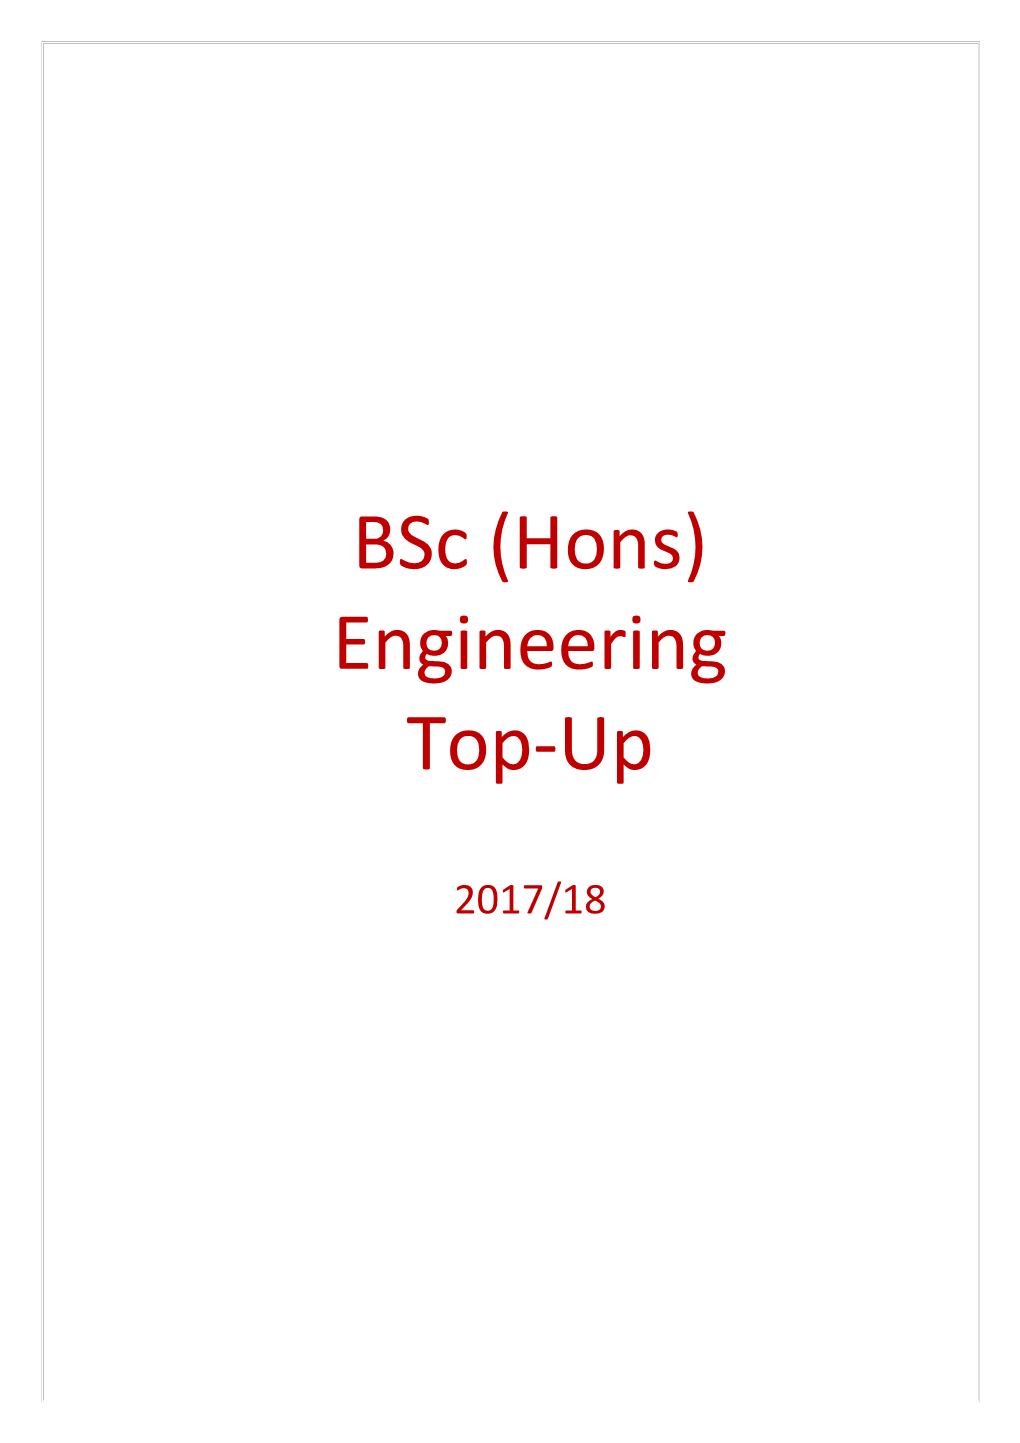 WELCOME to Bsc ENGINEERING TOP-UP